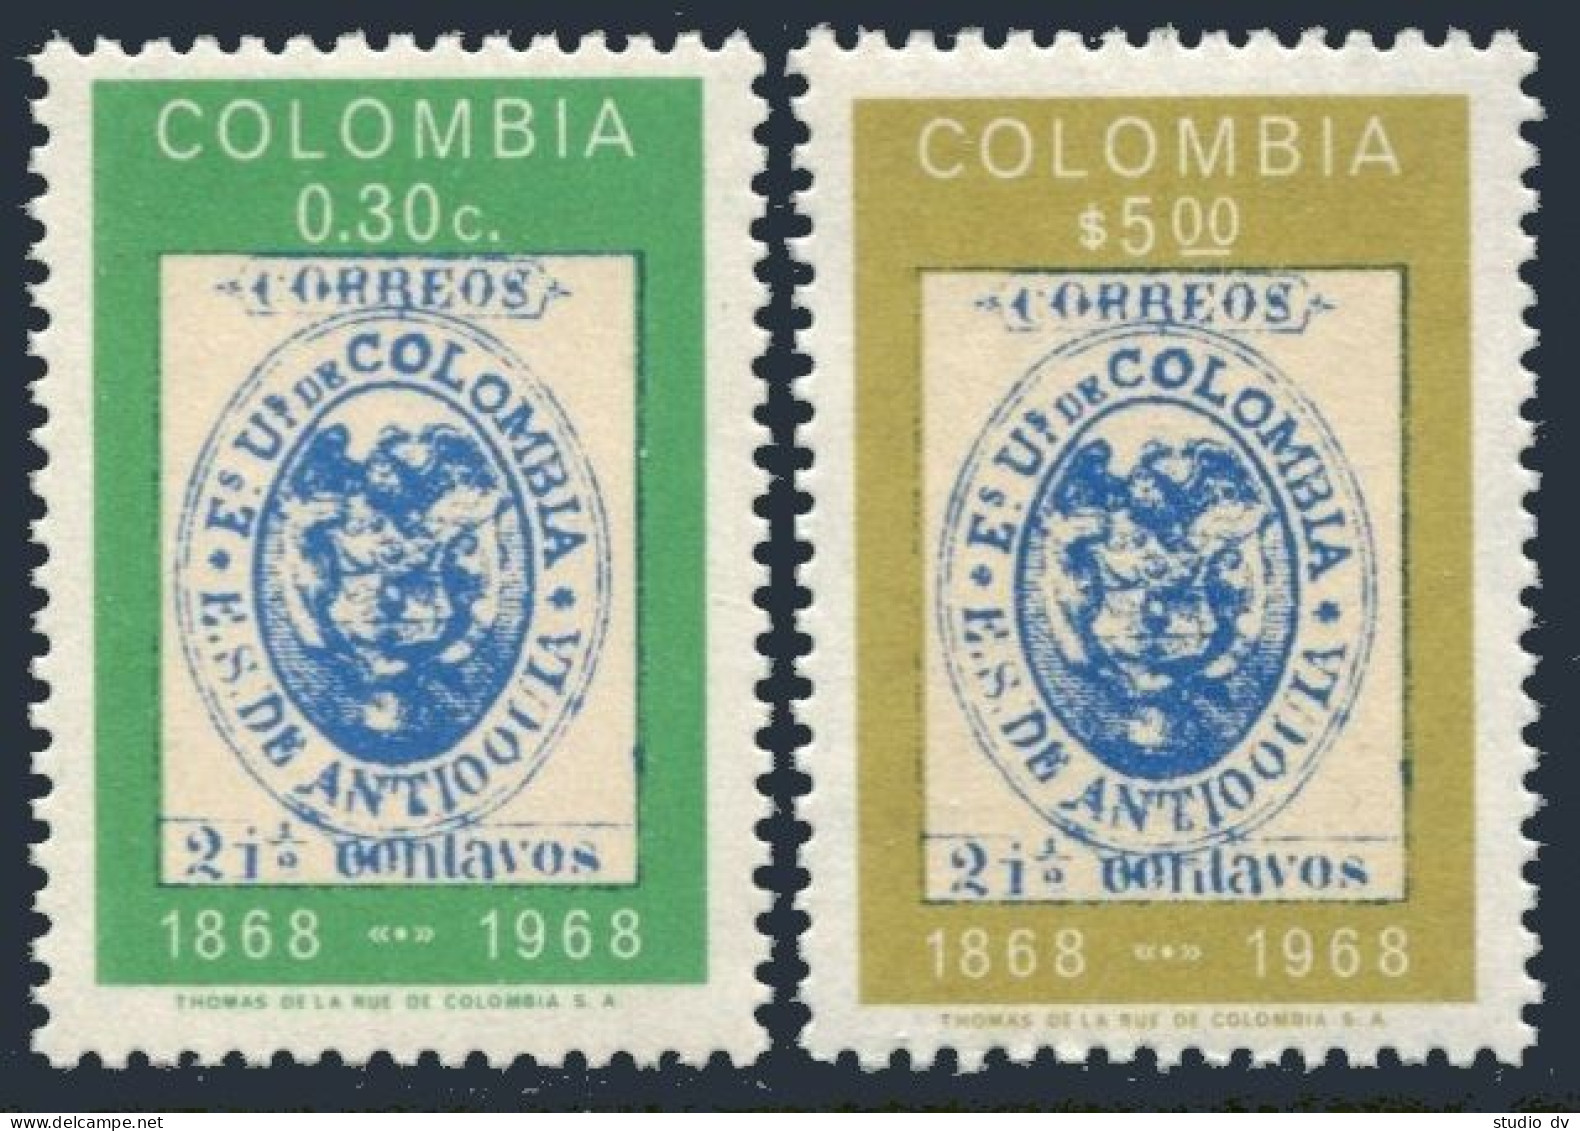 Colombia 784-785a,785,MNH.Michel 1141-1142,Bl.30.Postage Stamps Of Antioquia-100 - Colombia